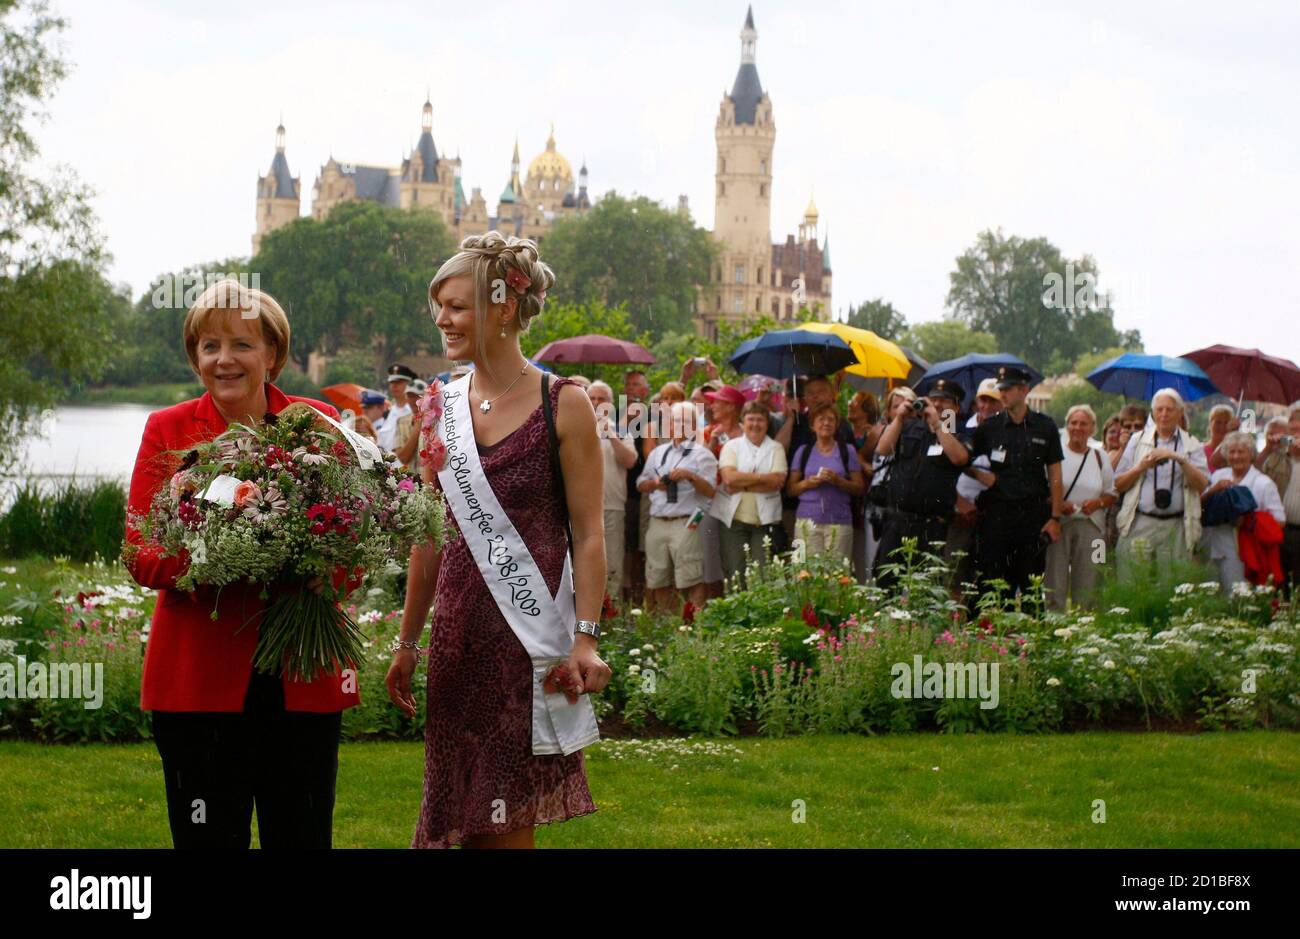 German Chancellor Angela Merkel poses with 'flower fairy' Victoria Salomon  (R) during her visit at the Bundesgartenschau 2009 (BUGA 2009) federal  horticultural show in Schwerin July 15, 2009. REUTERS/Christian Charisius  (GERMANY POLITICS